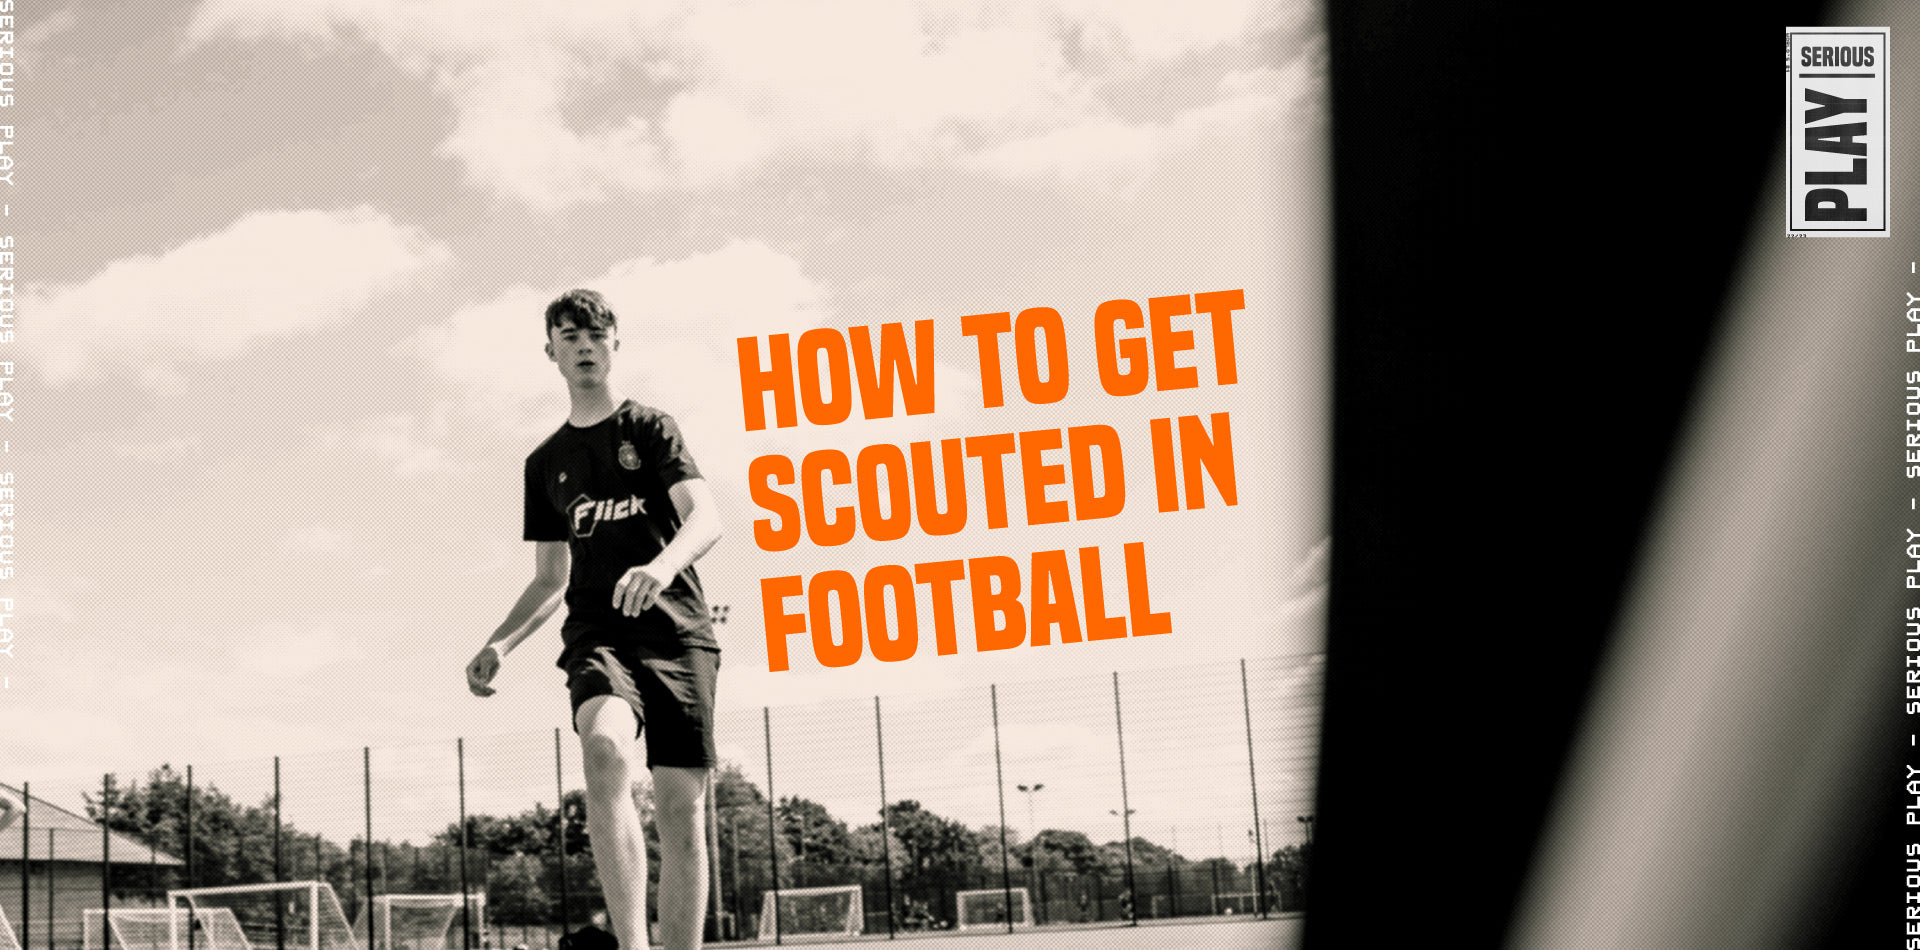 How To Get Scouted In Football